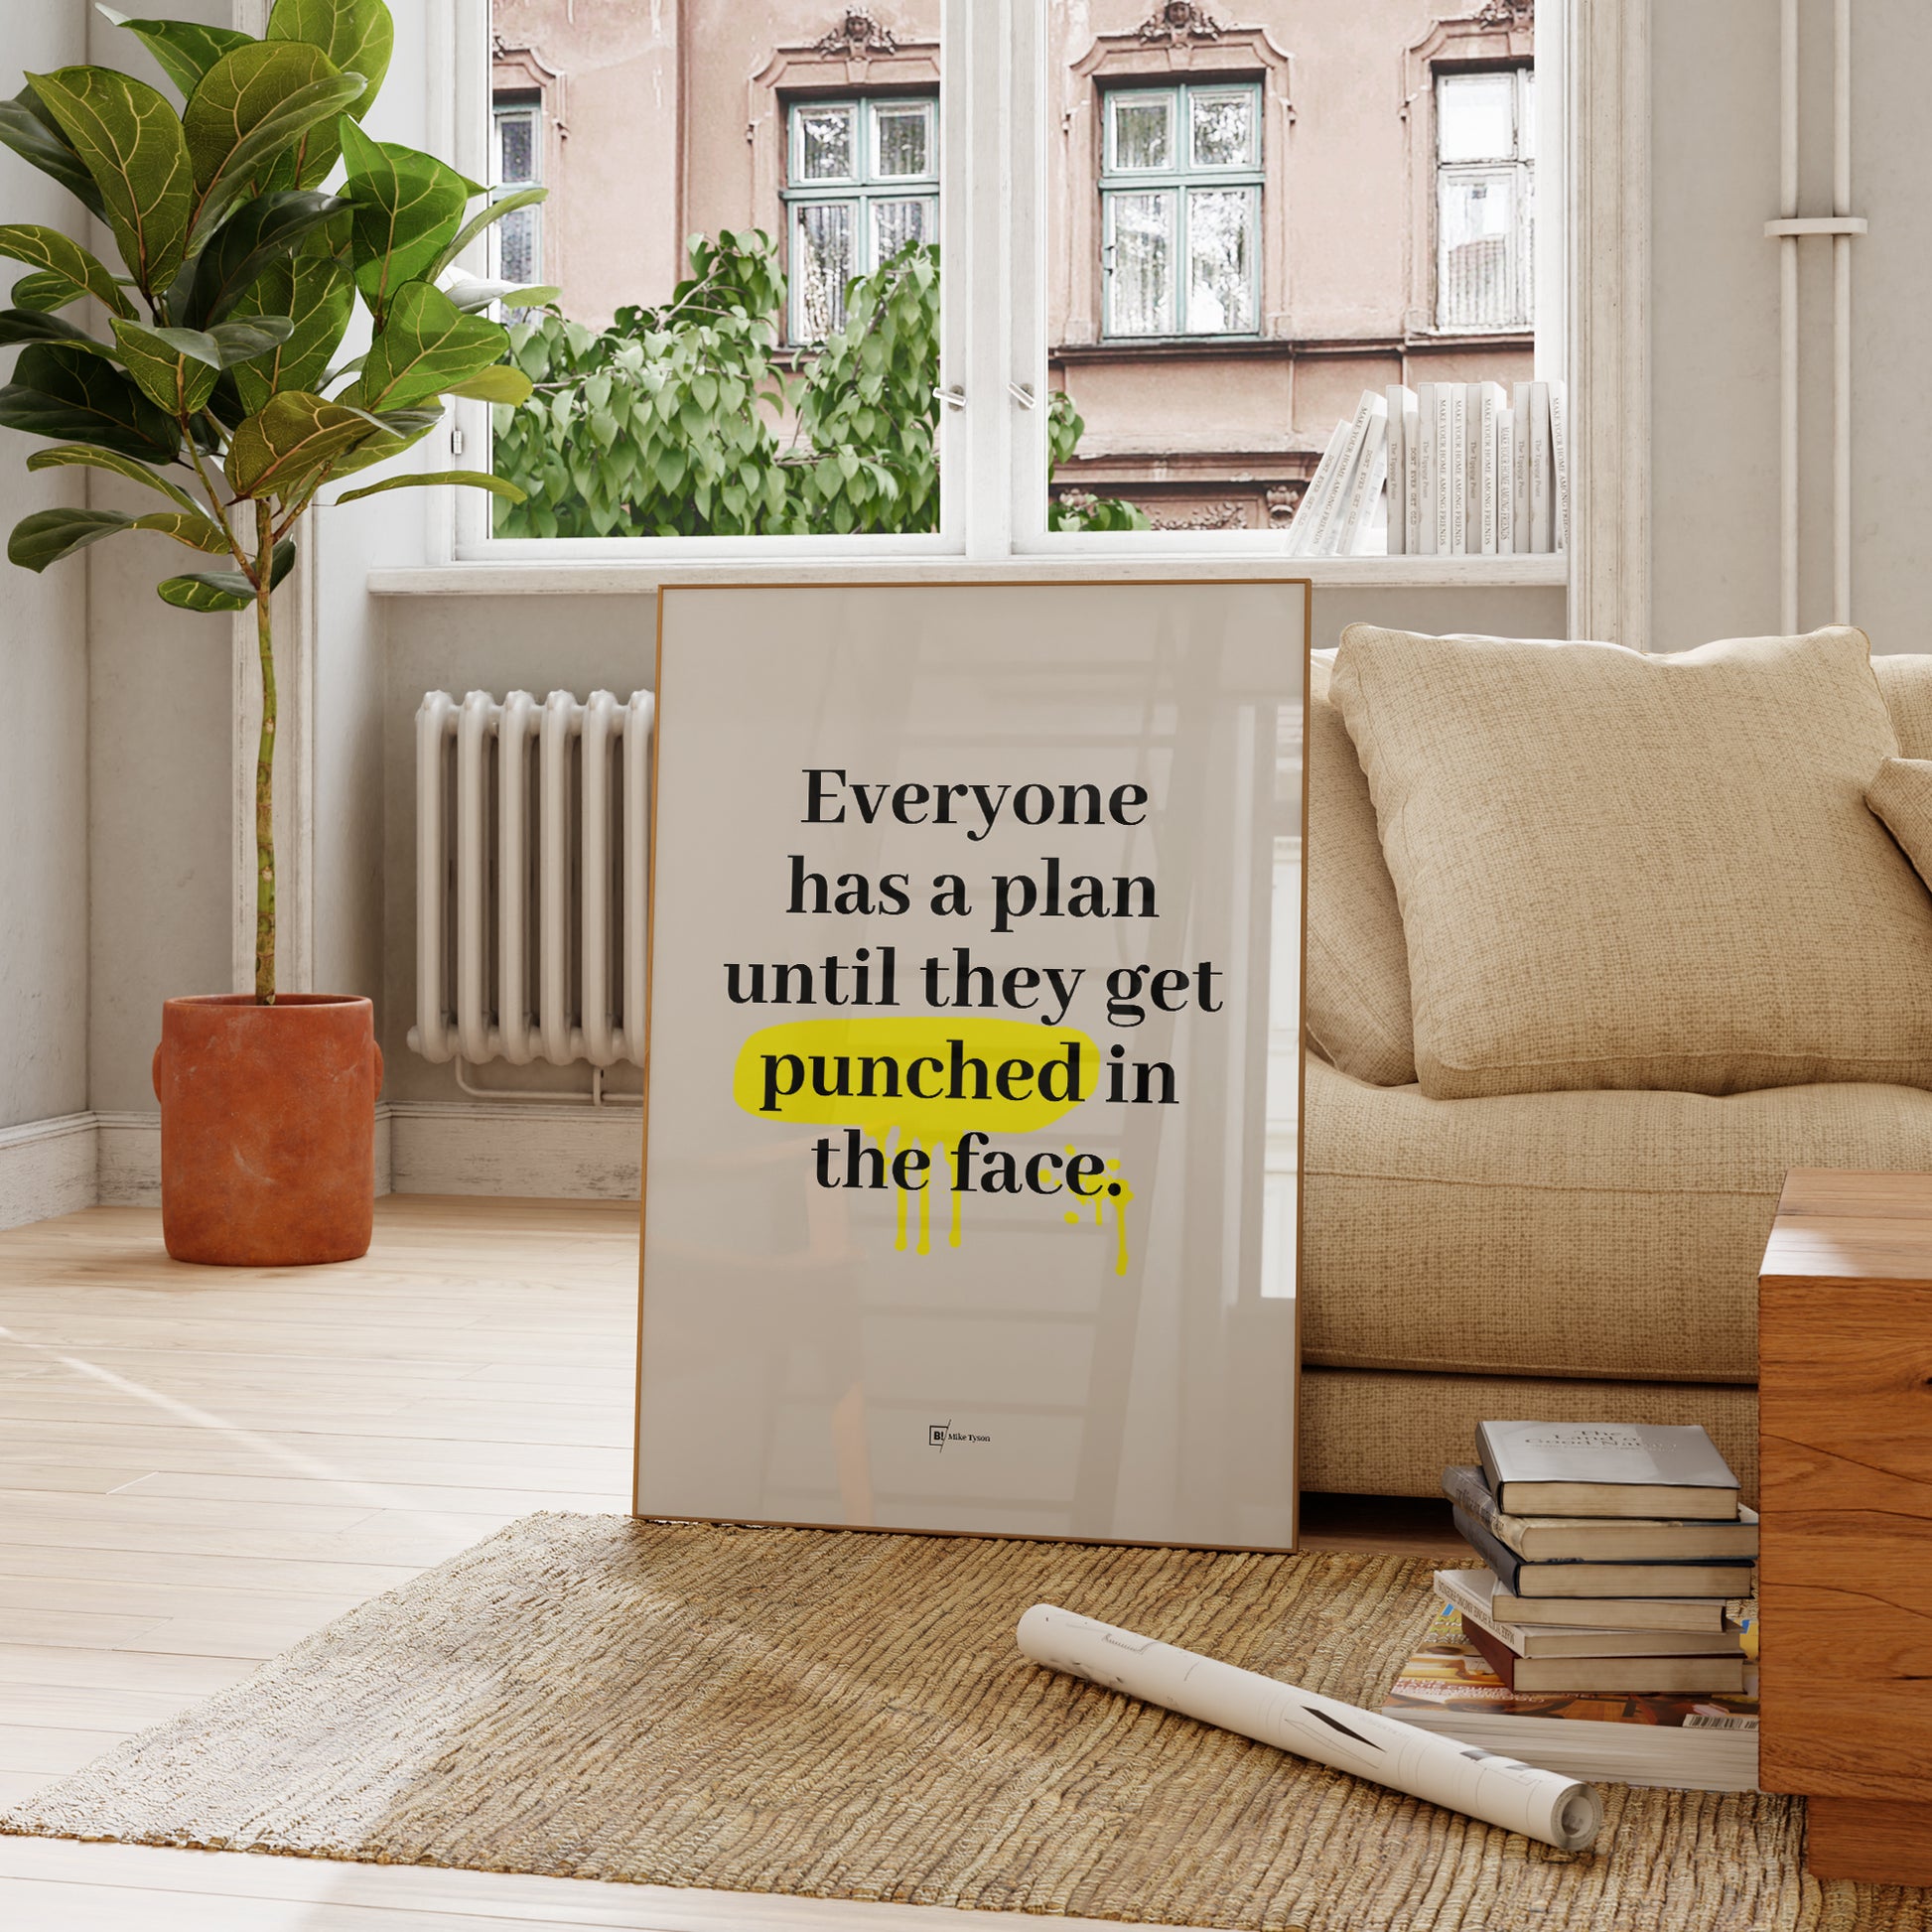 Be inspired by Mike Tyson's famous "Everyone has a plan until they get punched in the face" quote art print. This artwork was printed using the giclée process on archival acid-free paper and is presented in a french living room that captures its timeless beauty in every detail.